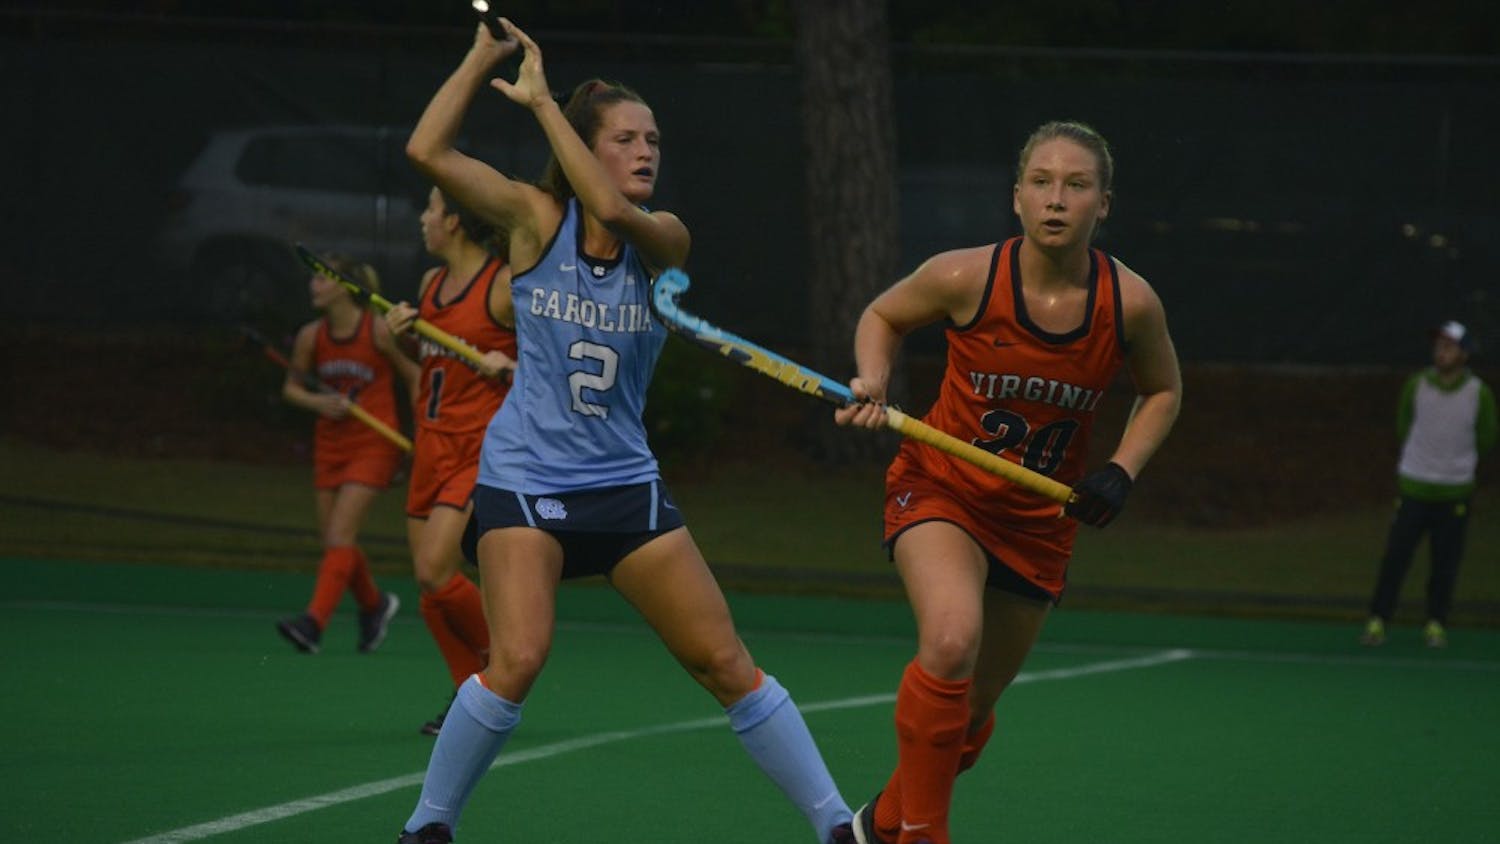 The UNC Women's Field Hockey team overcame Virginia in 3-2 overtime victory on Friday, October 7.